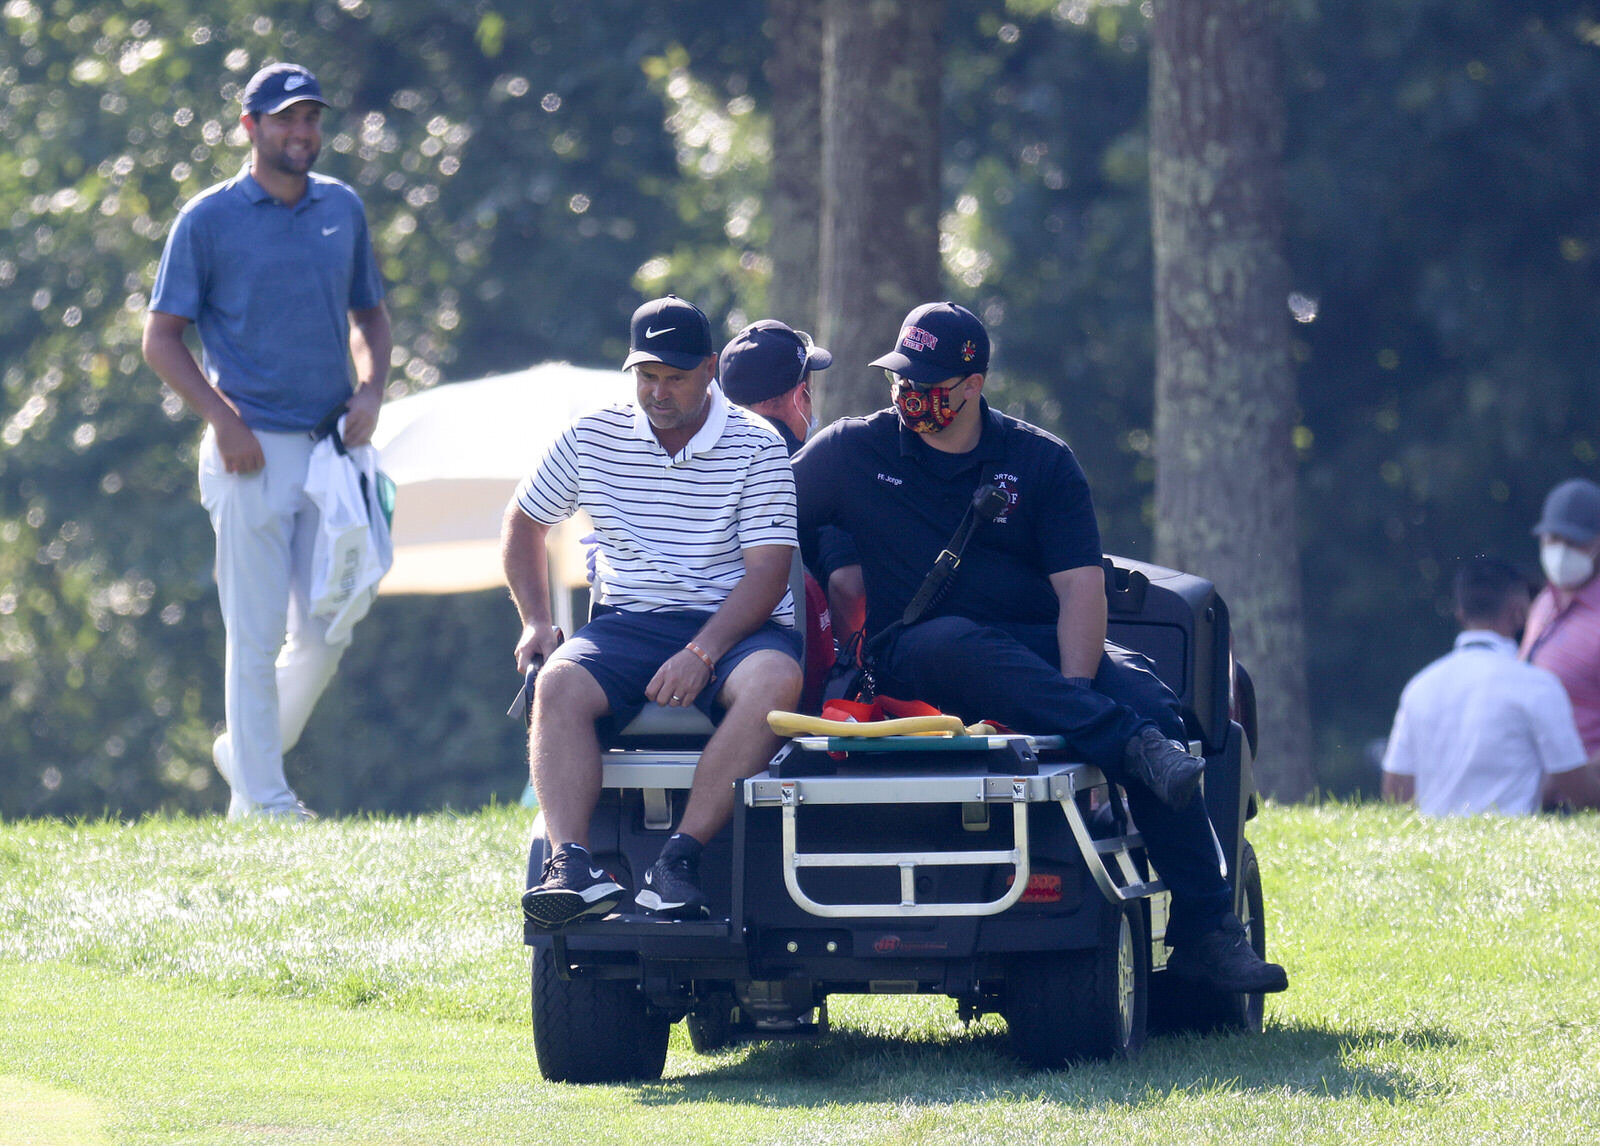  NORTON, MASSACHUSETTS - AUGUST 23: Caddie Scotty Macguiness leaves the course on a golf cart due to an injury as Scottie Scheffler of the United States looks on during the final round of The Northern Trust at TPC Boston on August 23, 2020 in Norton,